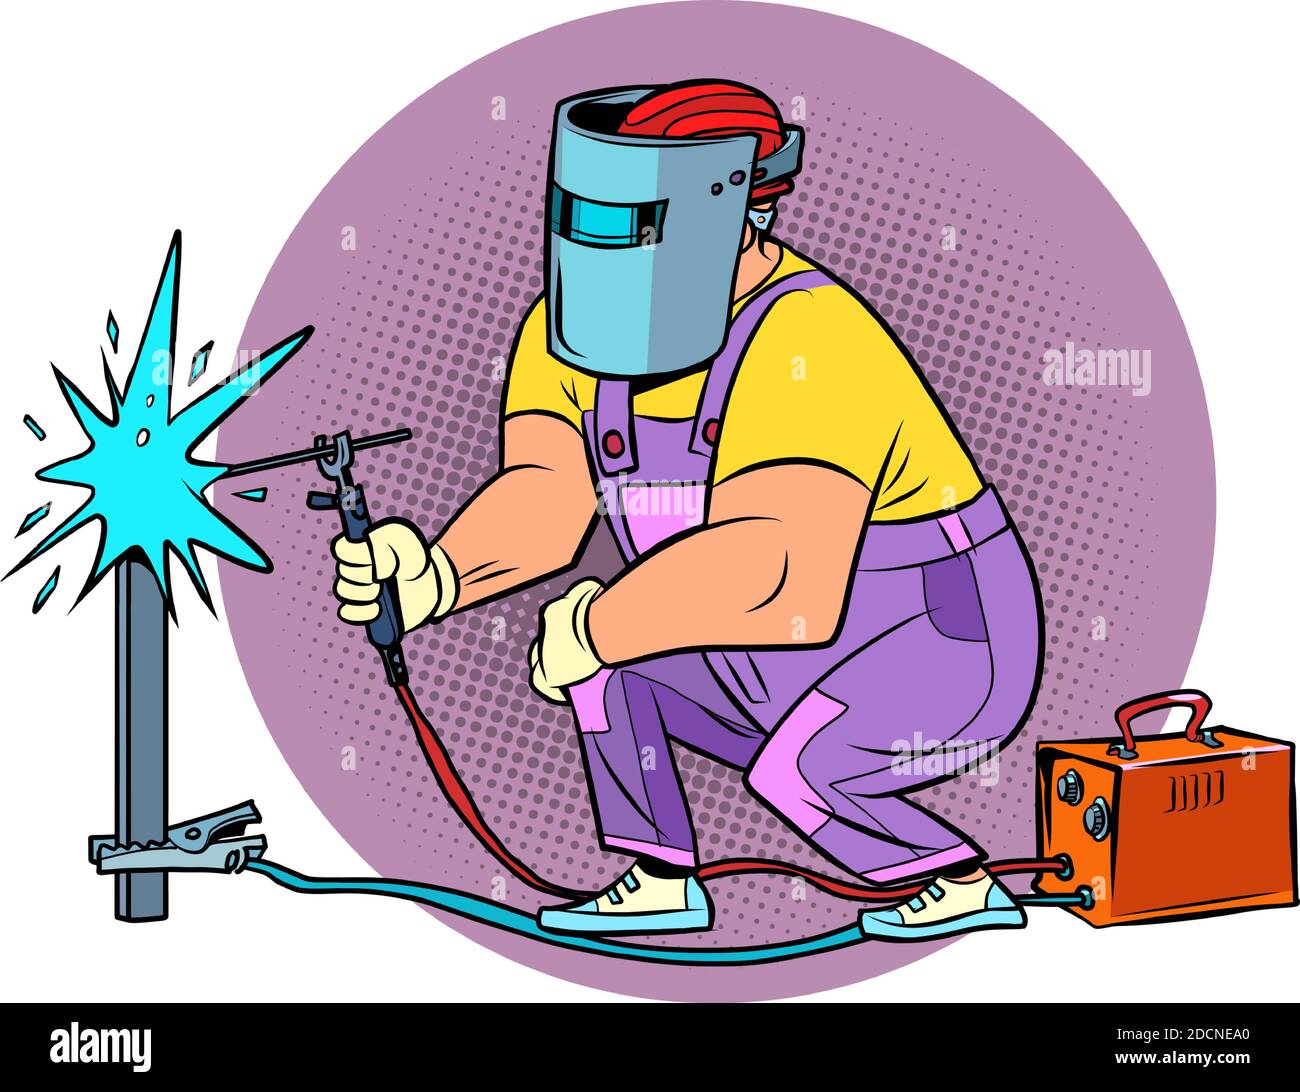 Welder. Worker welds the material. Construction and renovation Stock Vector